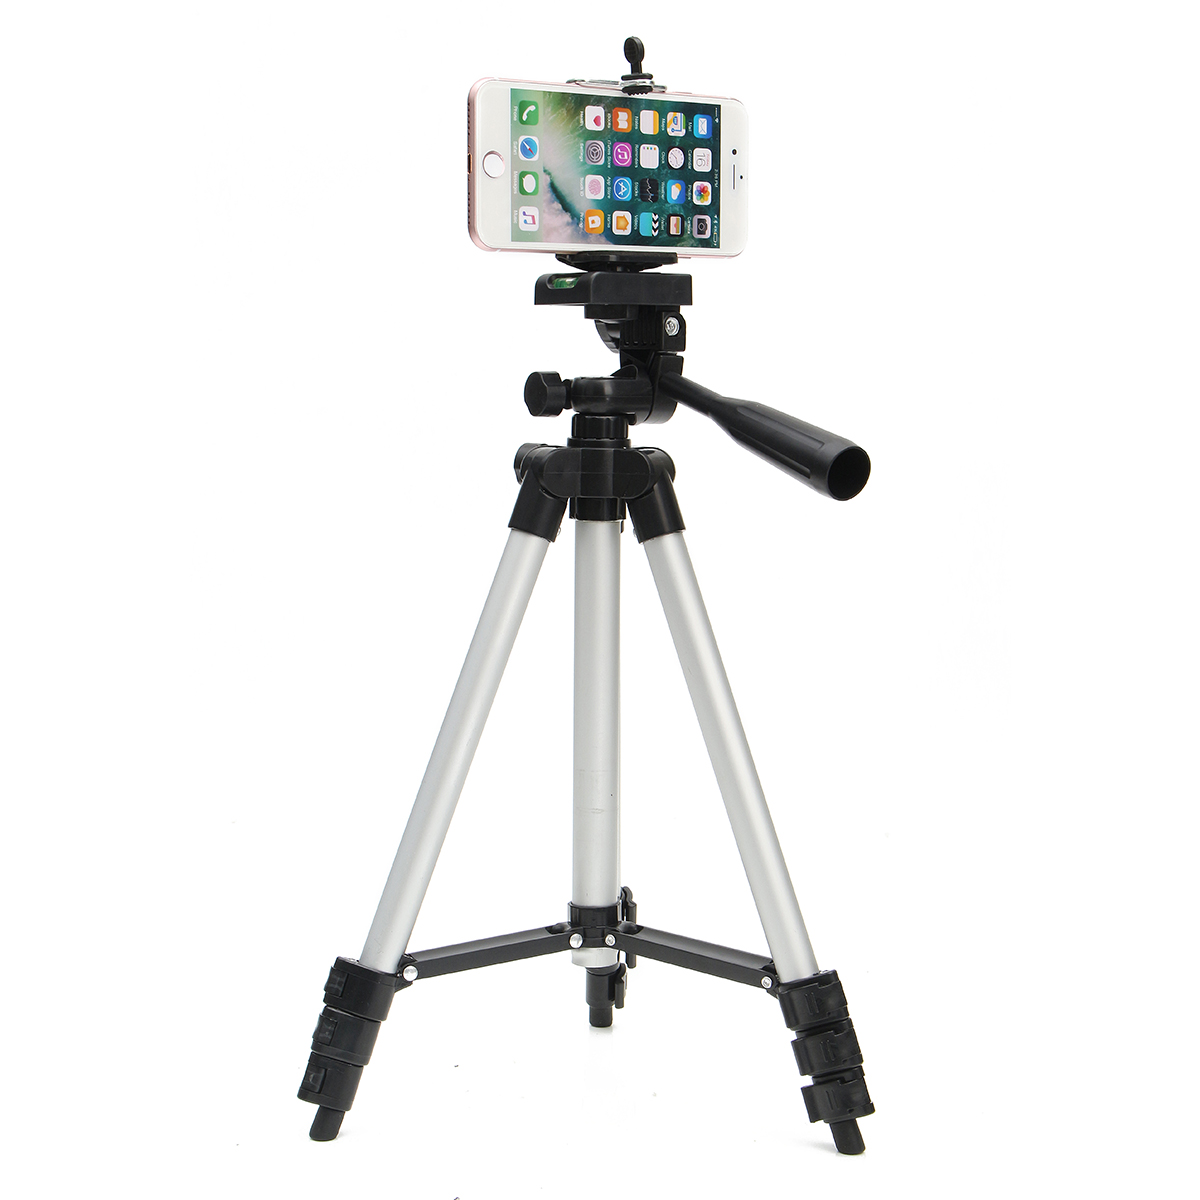 Bakeey-Professional-Camera-Adjustable-Tripod-Stand-Holder-Live-Selfie-Stick-for-iPhone-8-Plus-X-S8-S-1134052-9